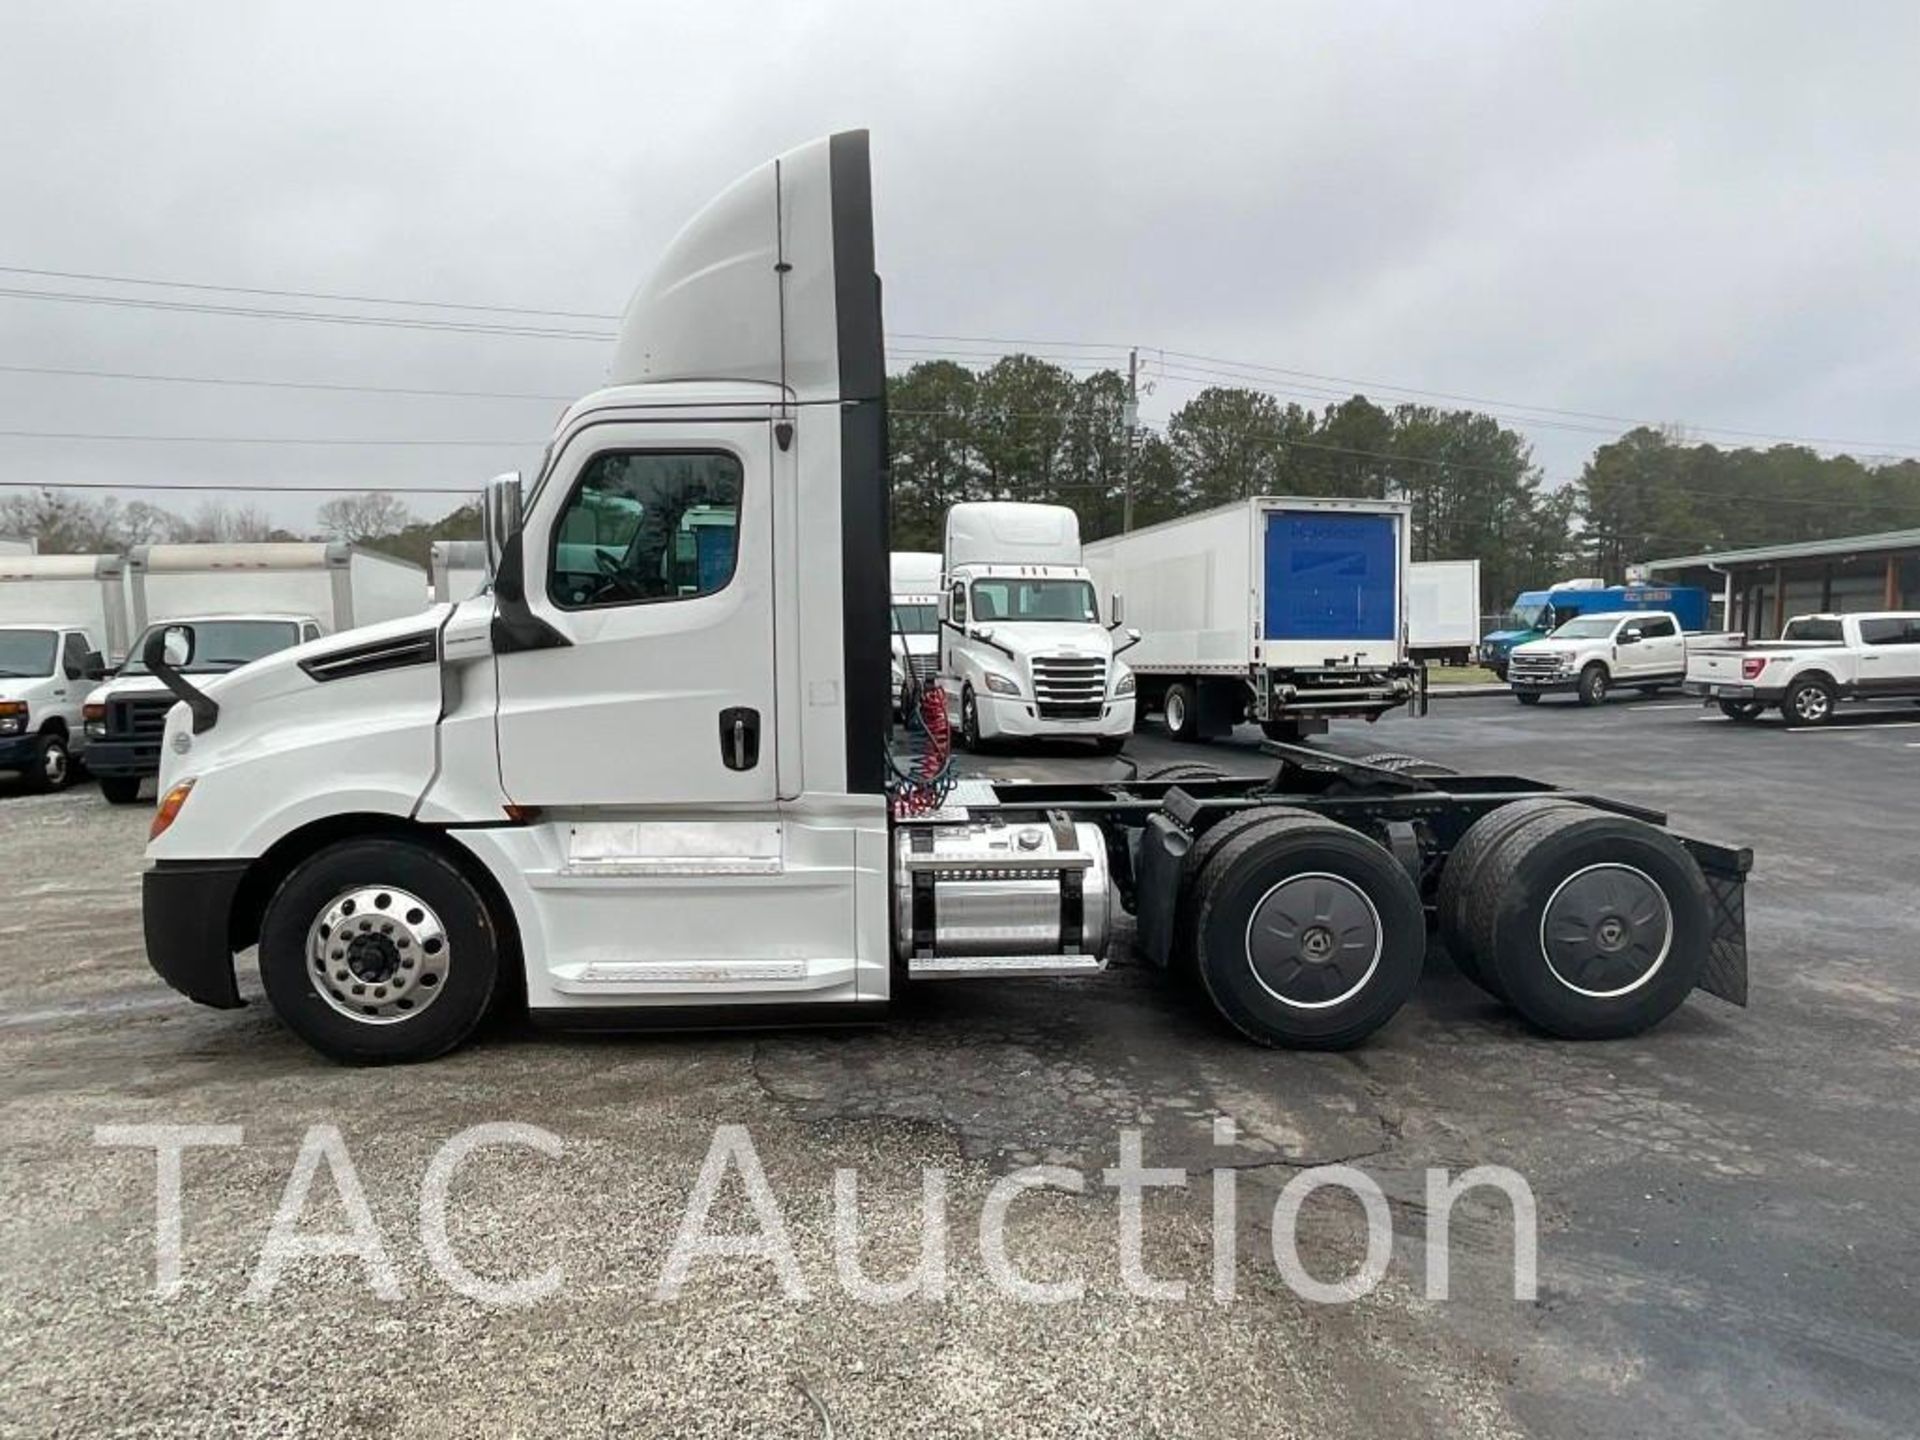 2019 Freightliner Cascadia Day Cab - Image 8 of 59